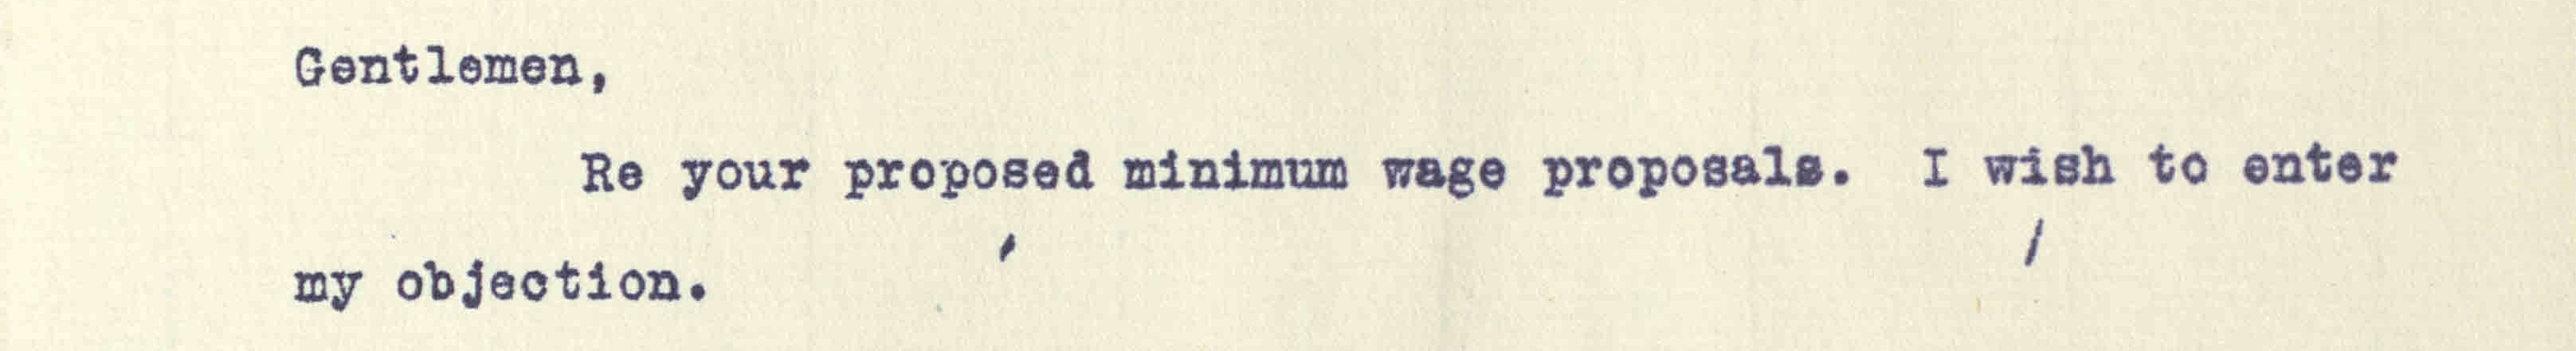 Extract from a the start of a letter of objection: "Gentlemen, Re your proposed minimum wage proposals. I wish to enter my objection.